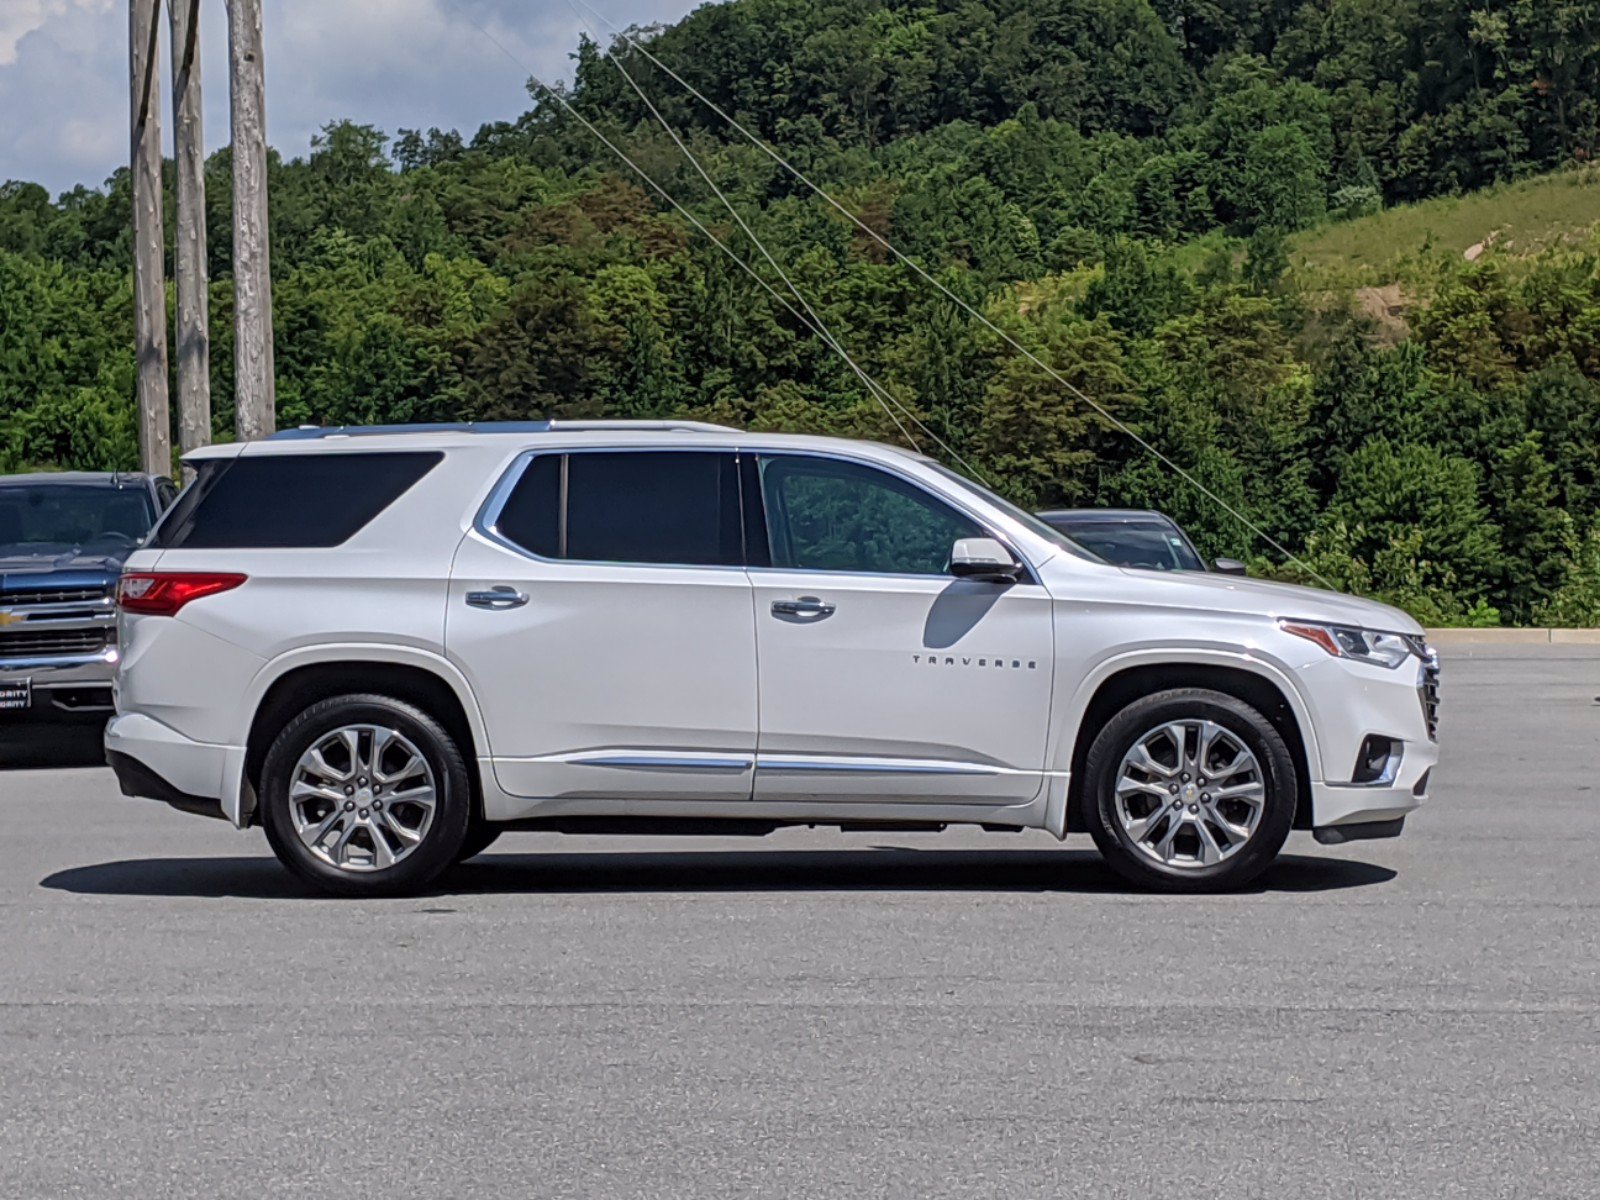 Pre-Owned 2018 Chevrolet Traverse Premier With Navigation & AWD